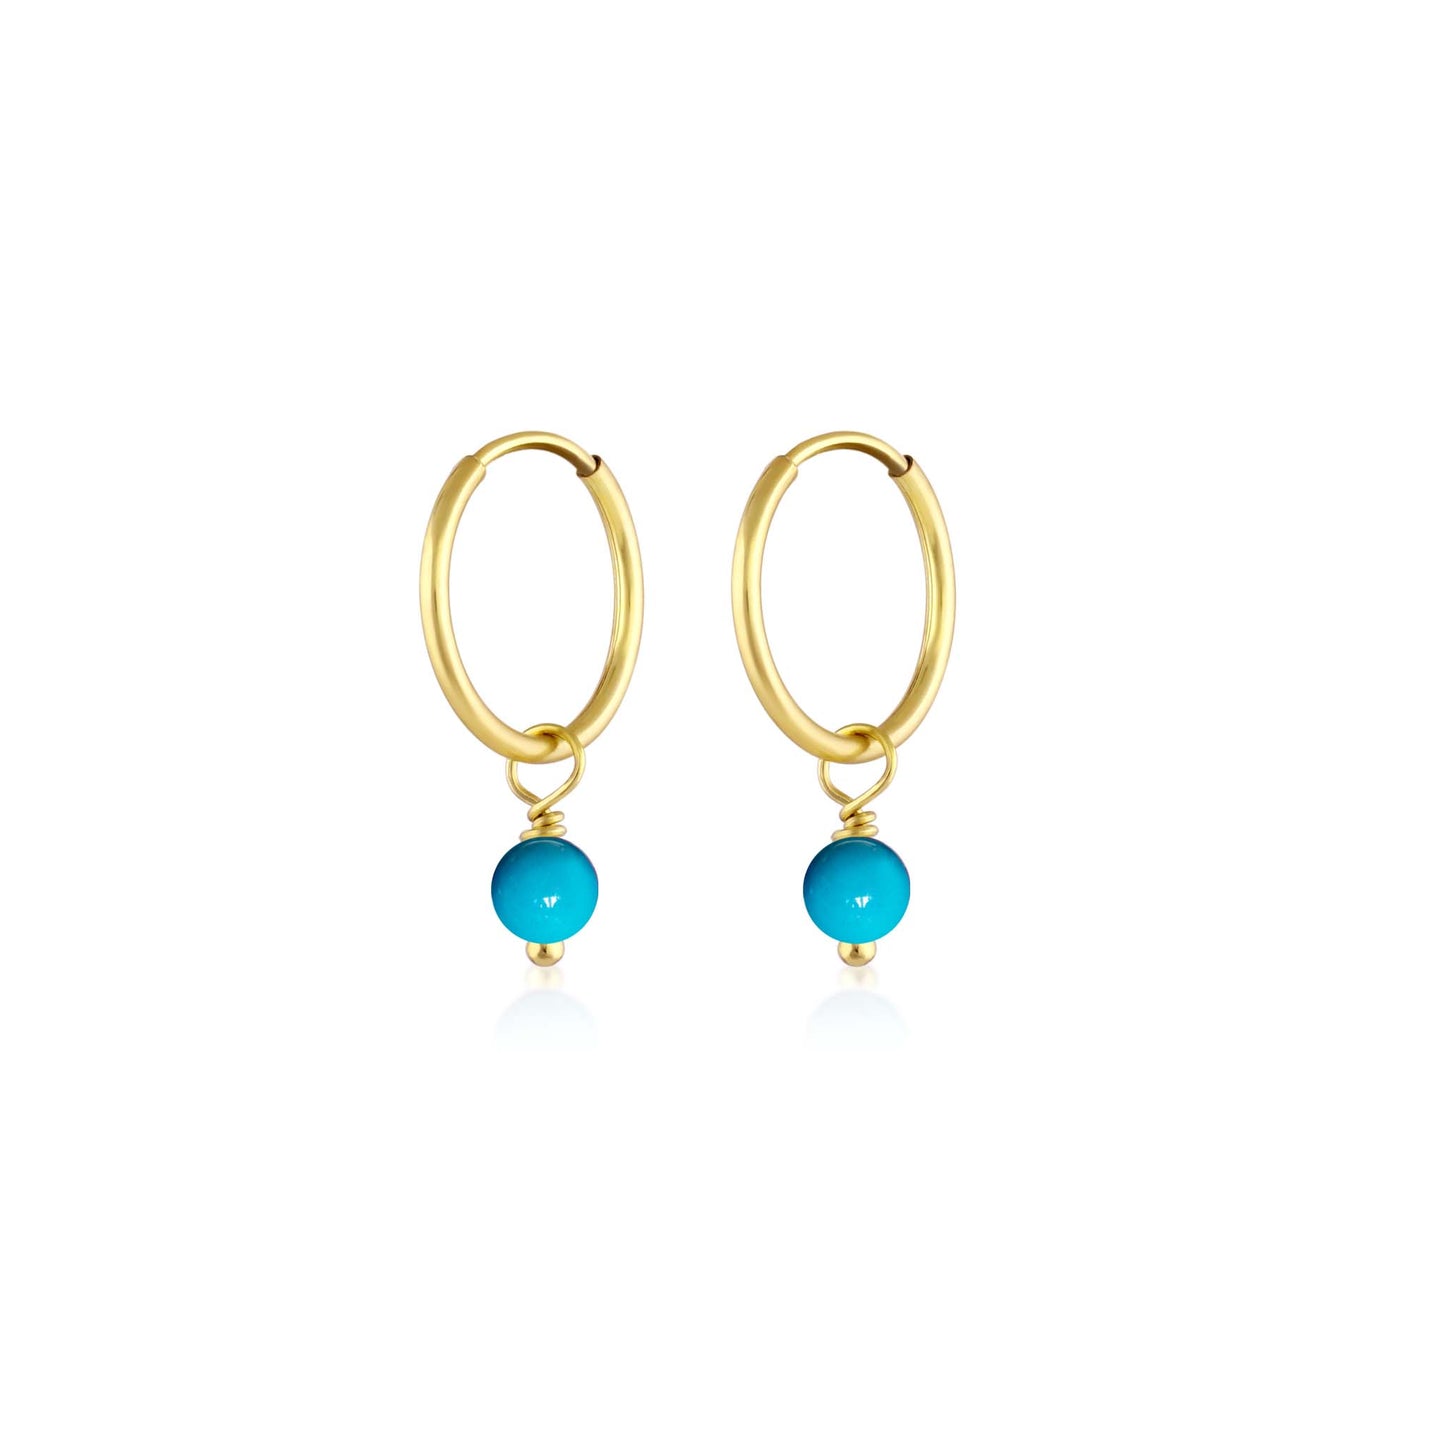 BORN TO ROCK® Jewelry | 14Kt Yellow Gold Filled Turquoise Charm Hoop Earrings | Discover our beautiful collection of hoop earrings at borntorockjewelry.com.  Shop Sterling silver or gold plated hoop earrings, earrings with natural gemstones beads, charm hoops and stud earrings. A personalized gift idea for every mom, grandma, bride, bridesmaid, daughter, wife, mother-in-law & loved one. 